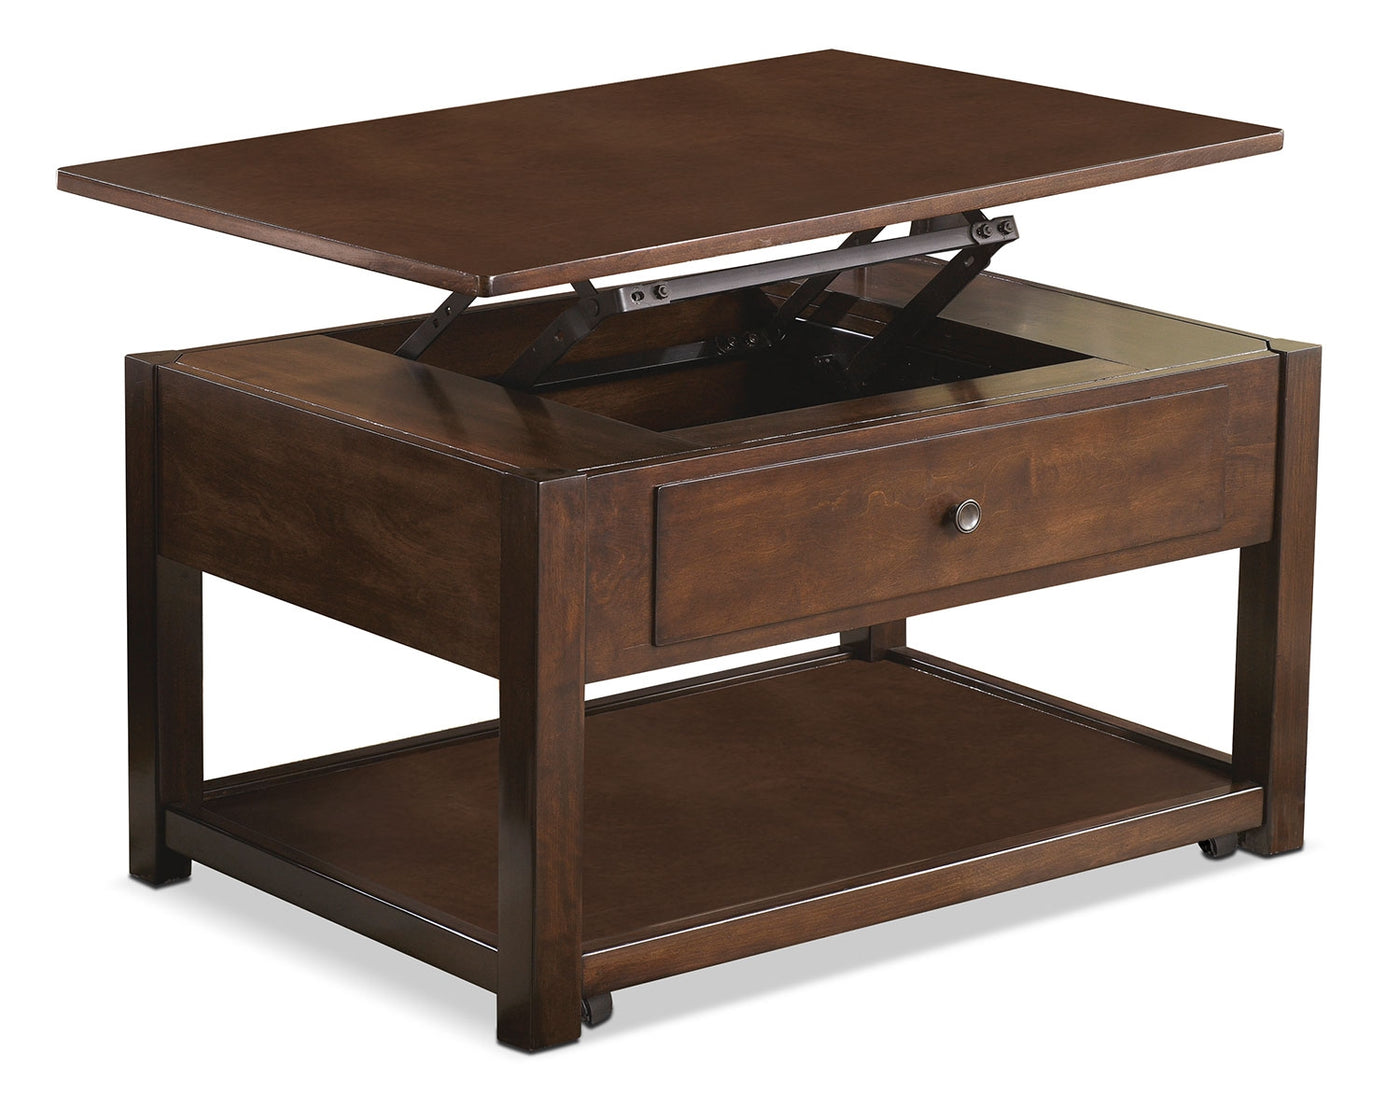 Marion Coffee Table With Lift Top And Casters The Brick